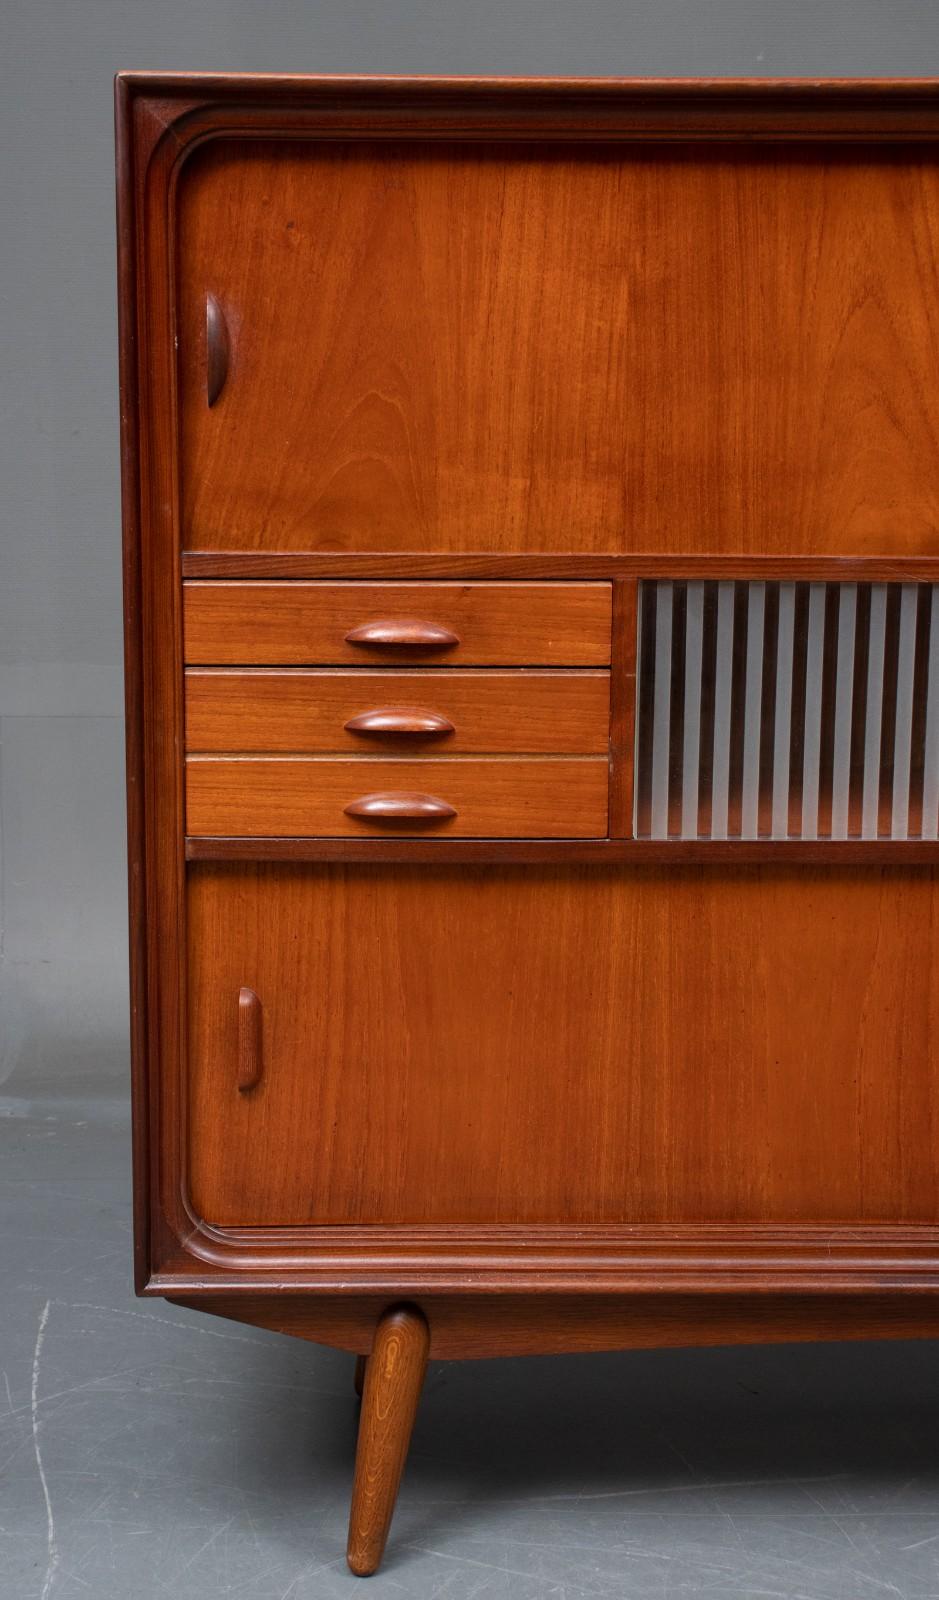 Lacquered Danish Modern Tall Midcentury Teak Sideboard or Credenza in Teak and Oak